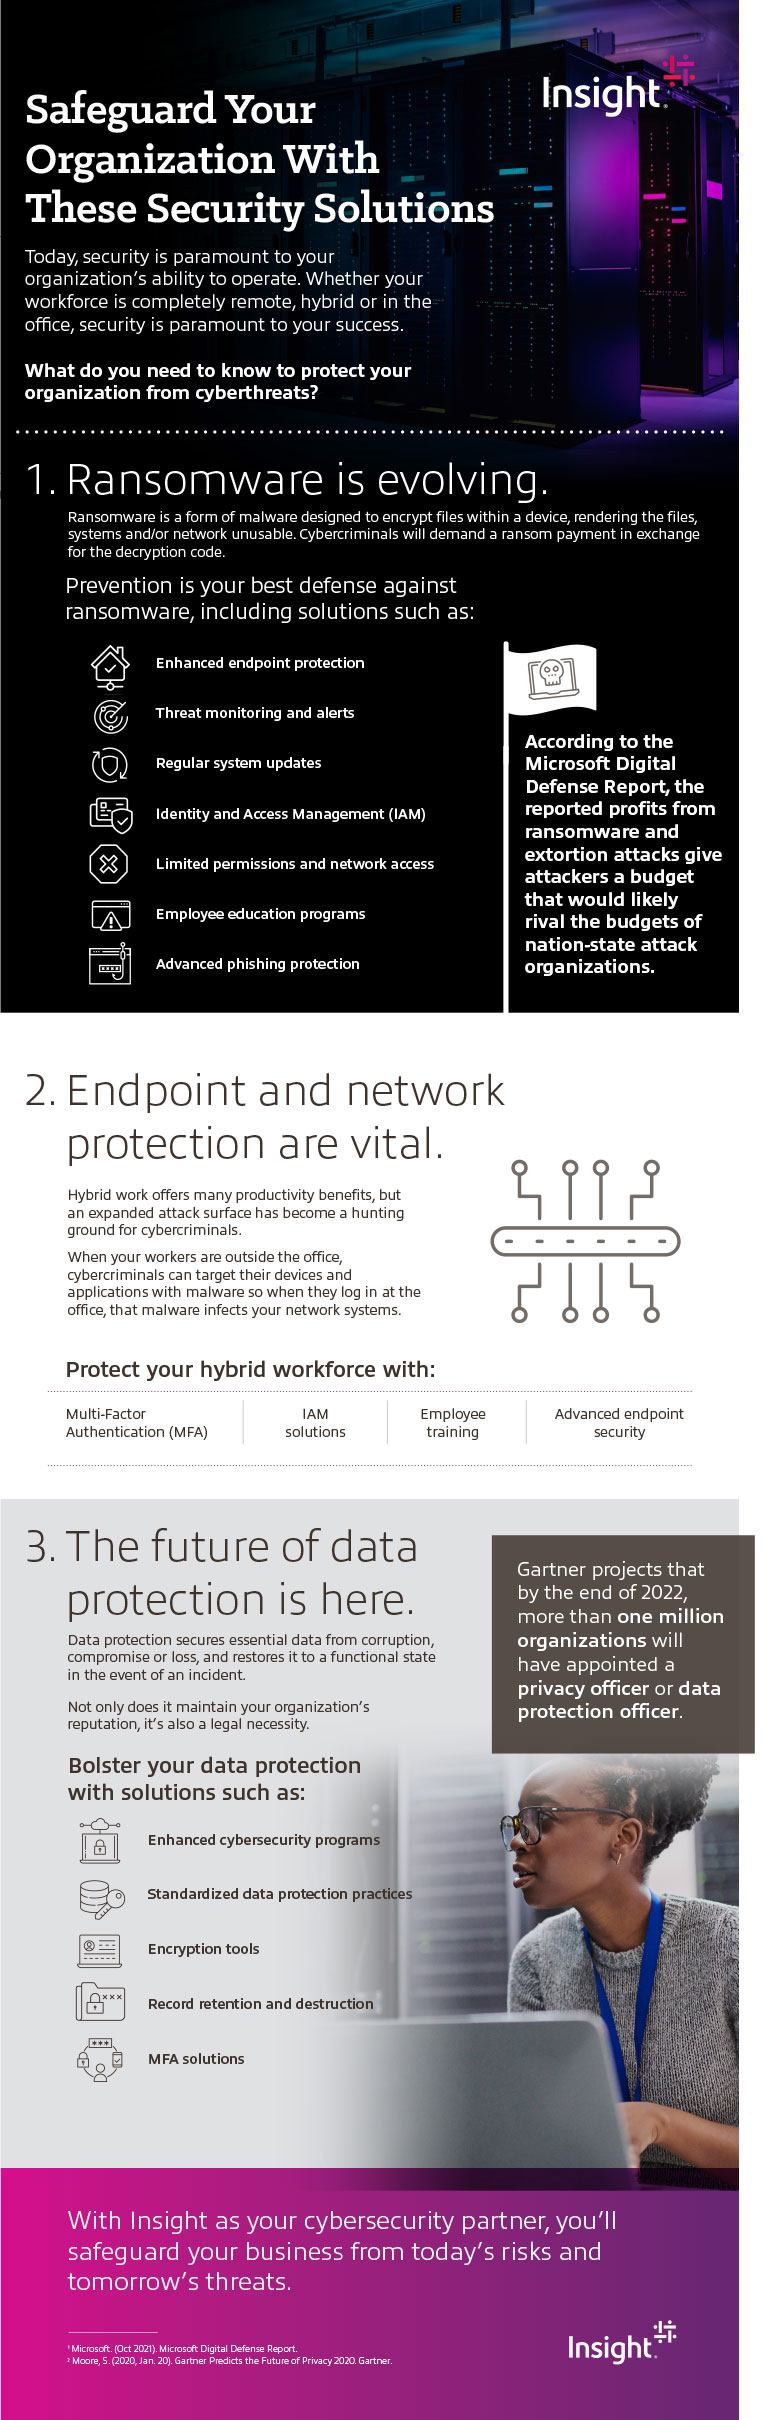 Safeguard Your Business With These Security Solutions infographic transcribed below